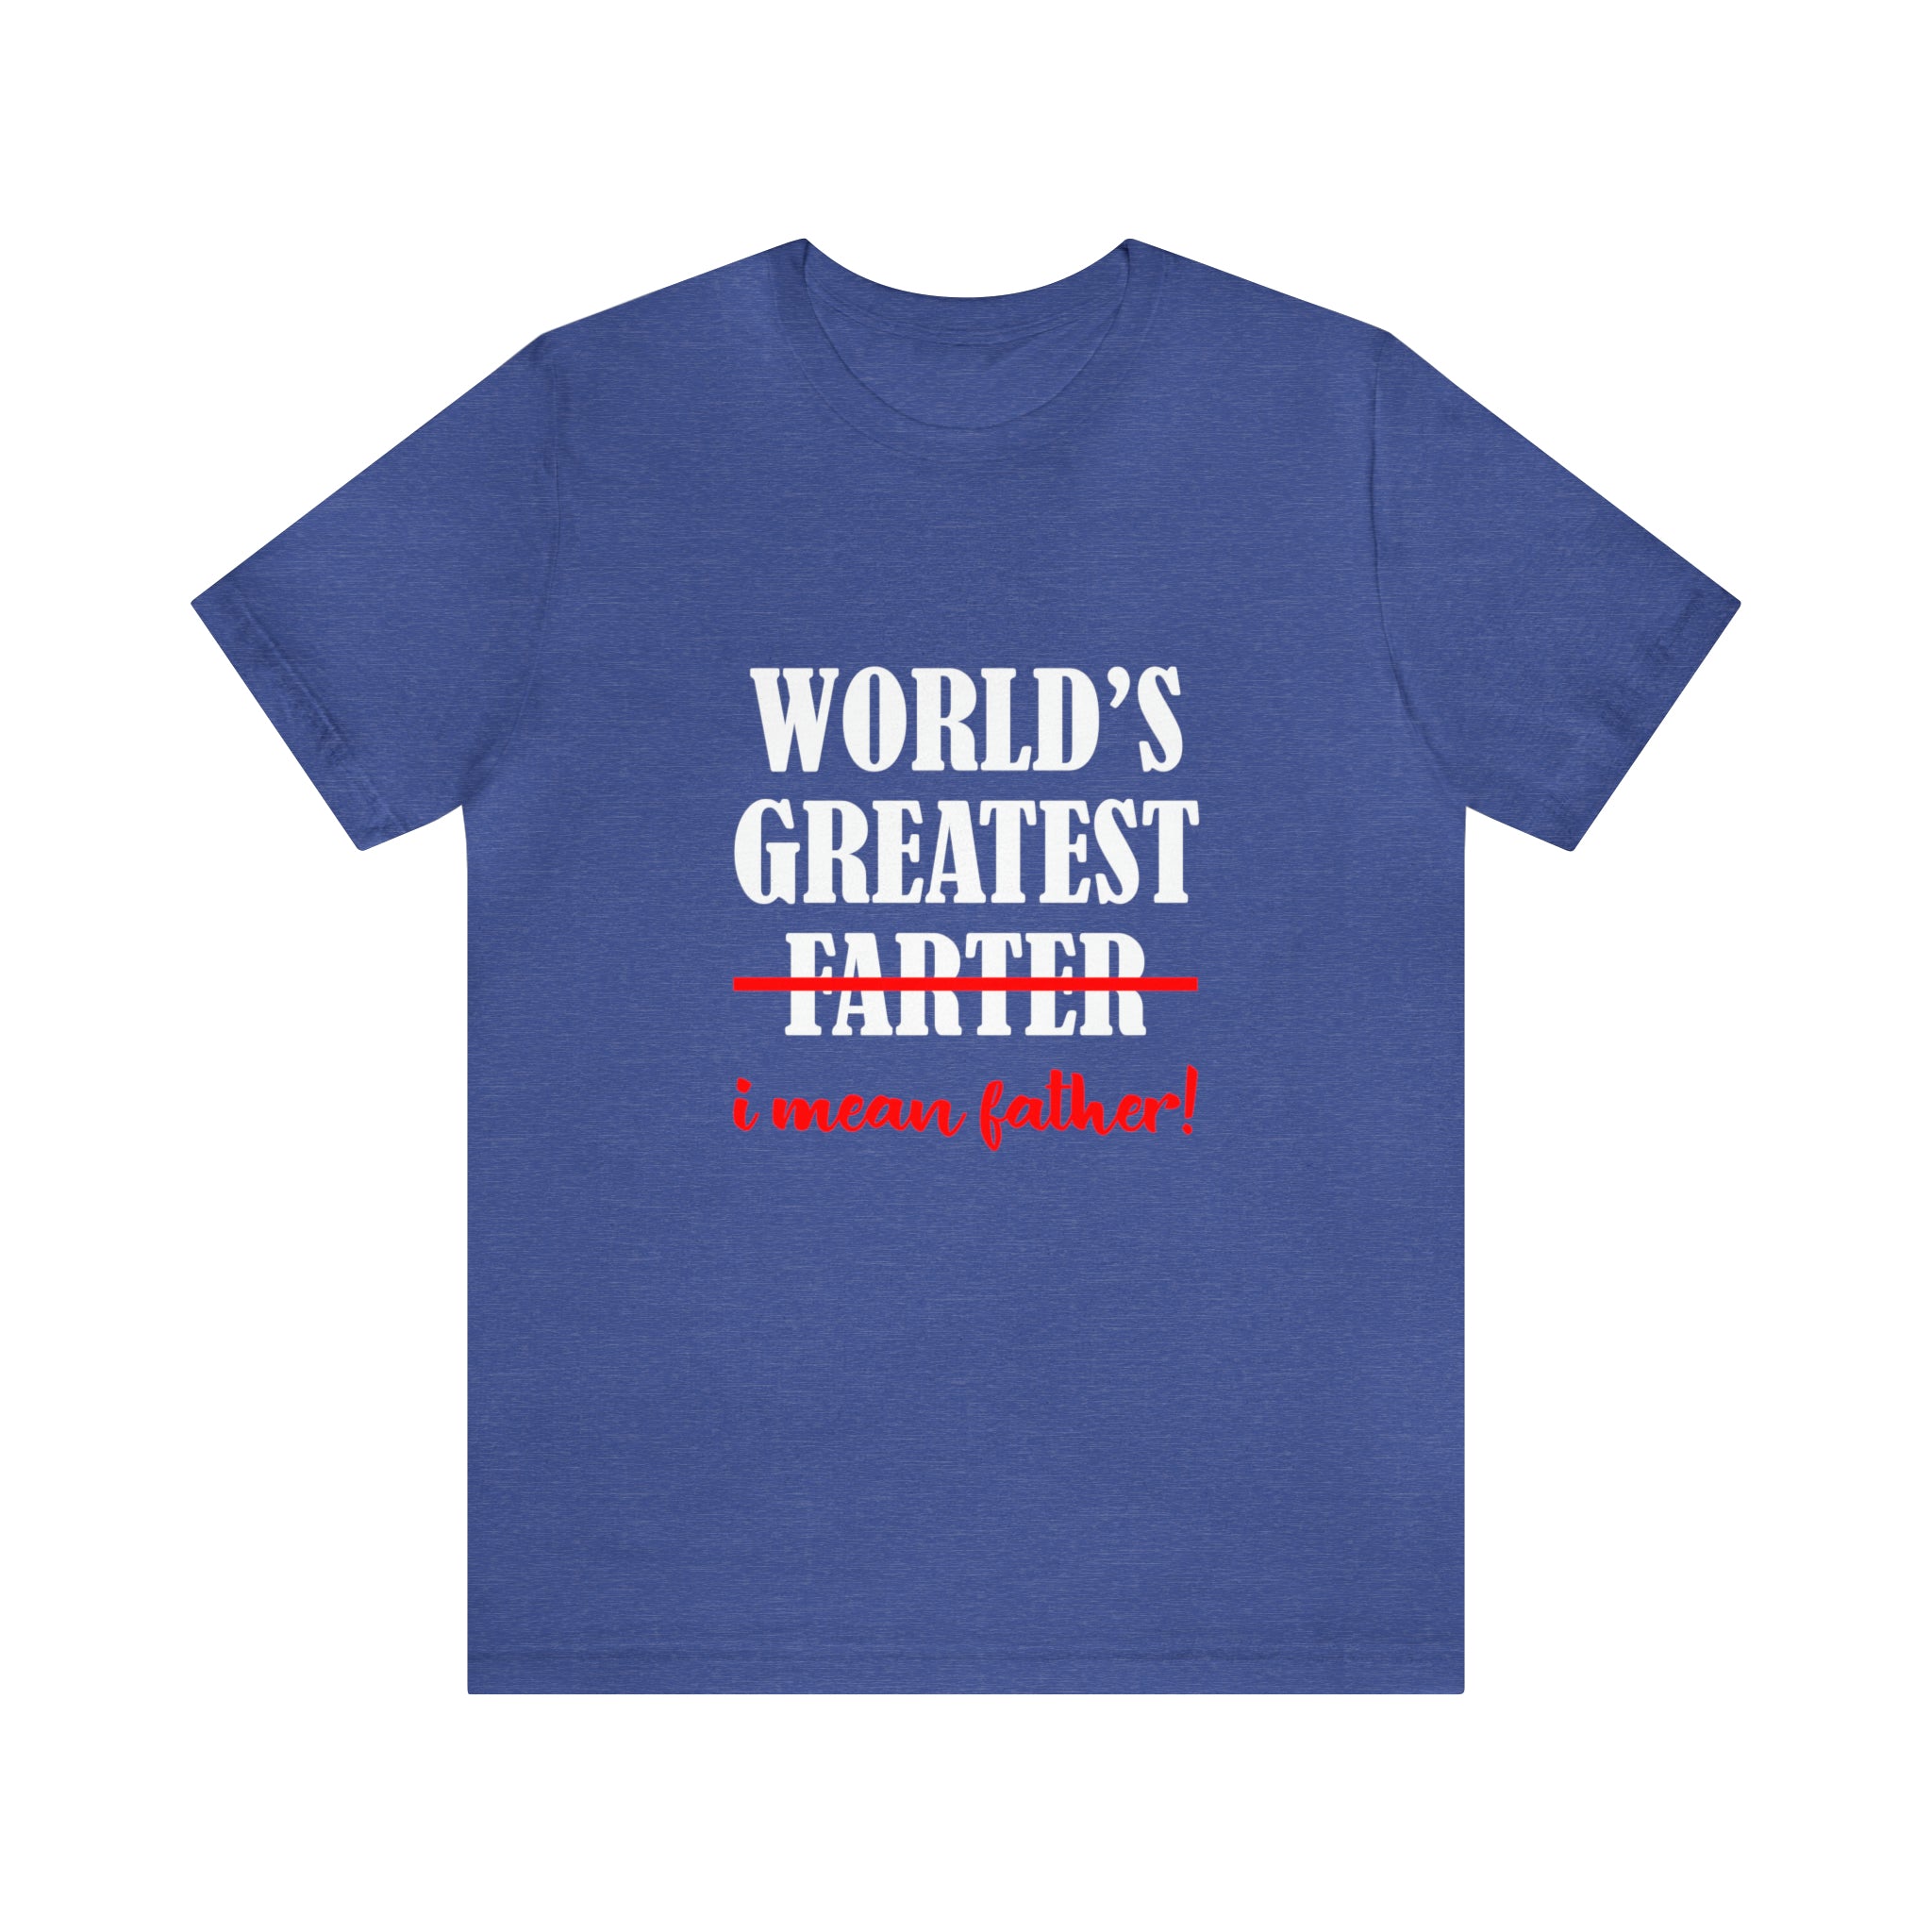 A humorous Worlds Greatest Farter I mean Father T-Shirt that proudly declares "I'm a teacher" and shows off the title of "world's greatest teacher".